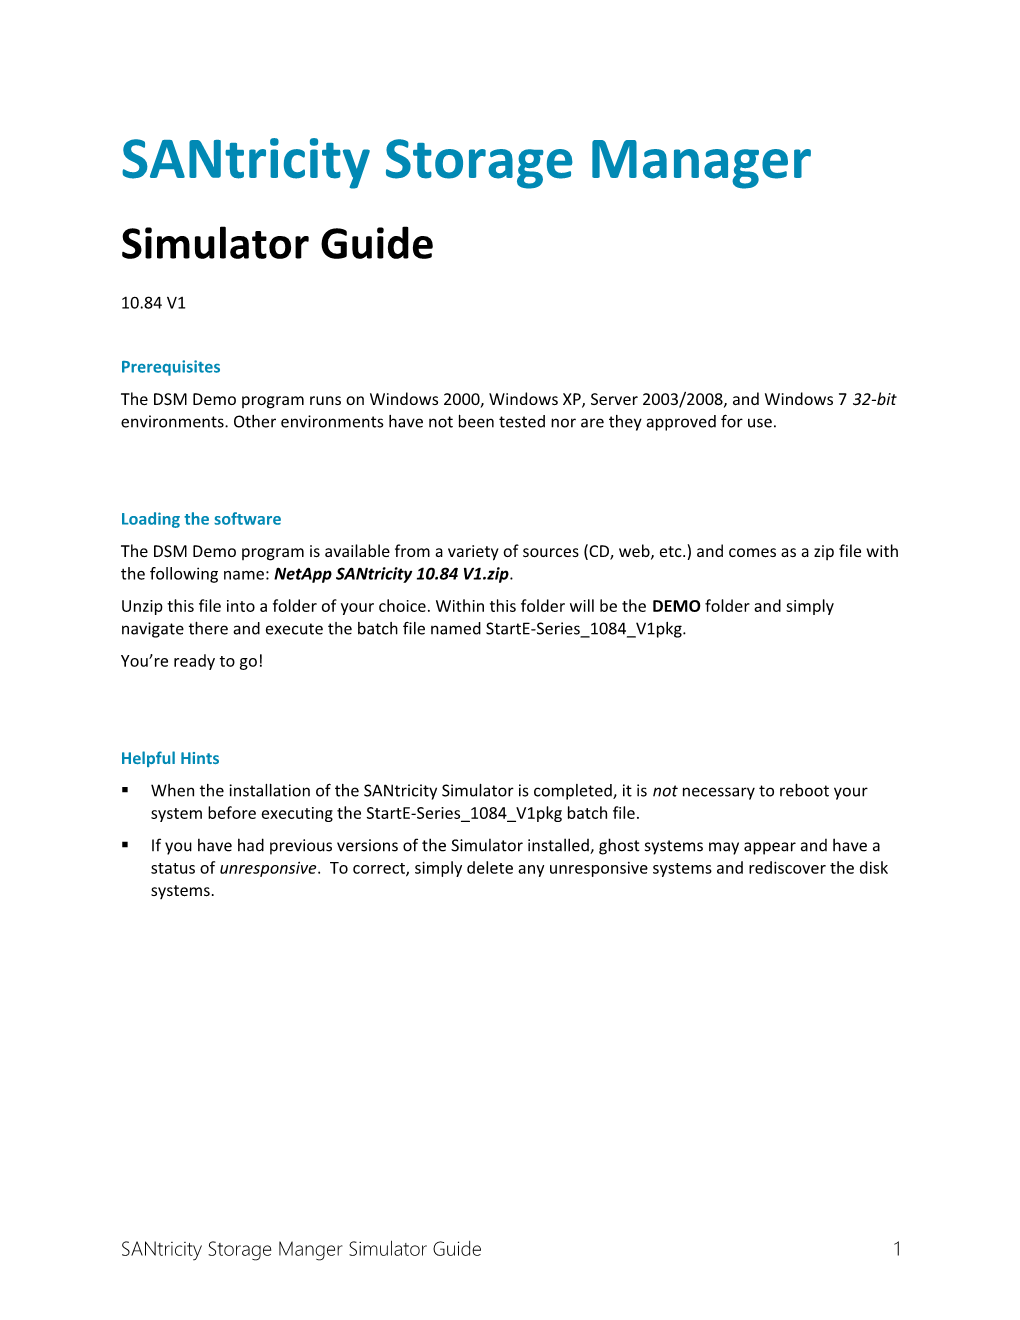 DS Storage Manager Simulator Guide